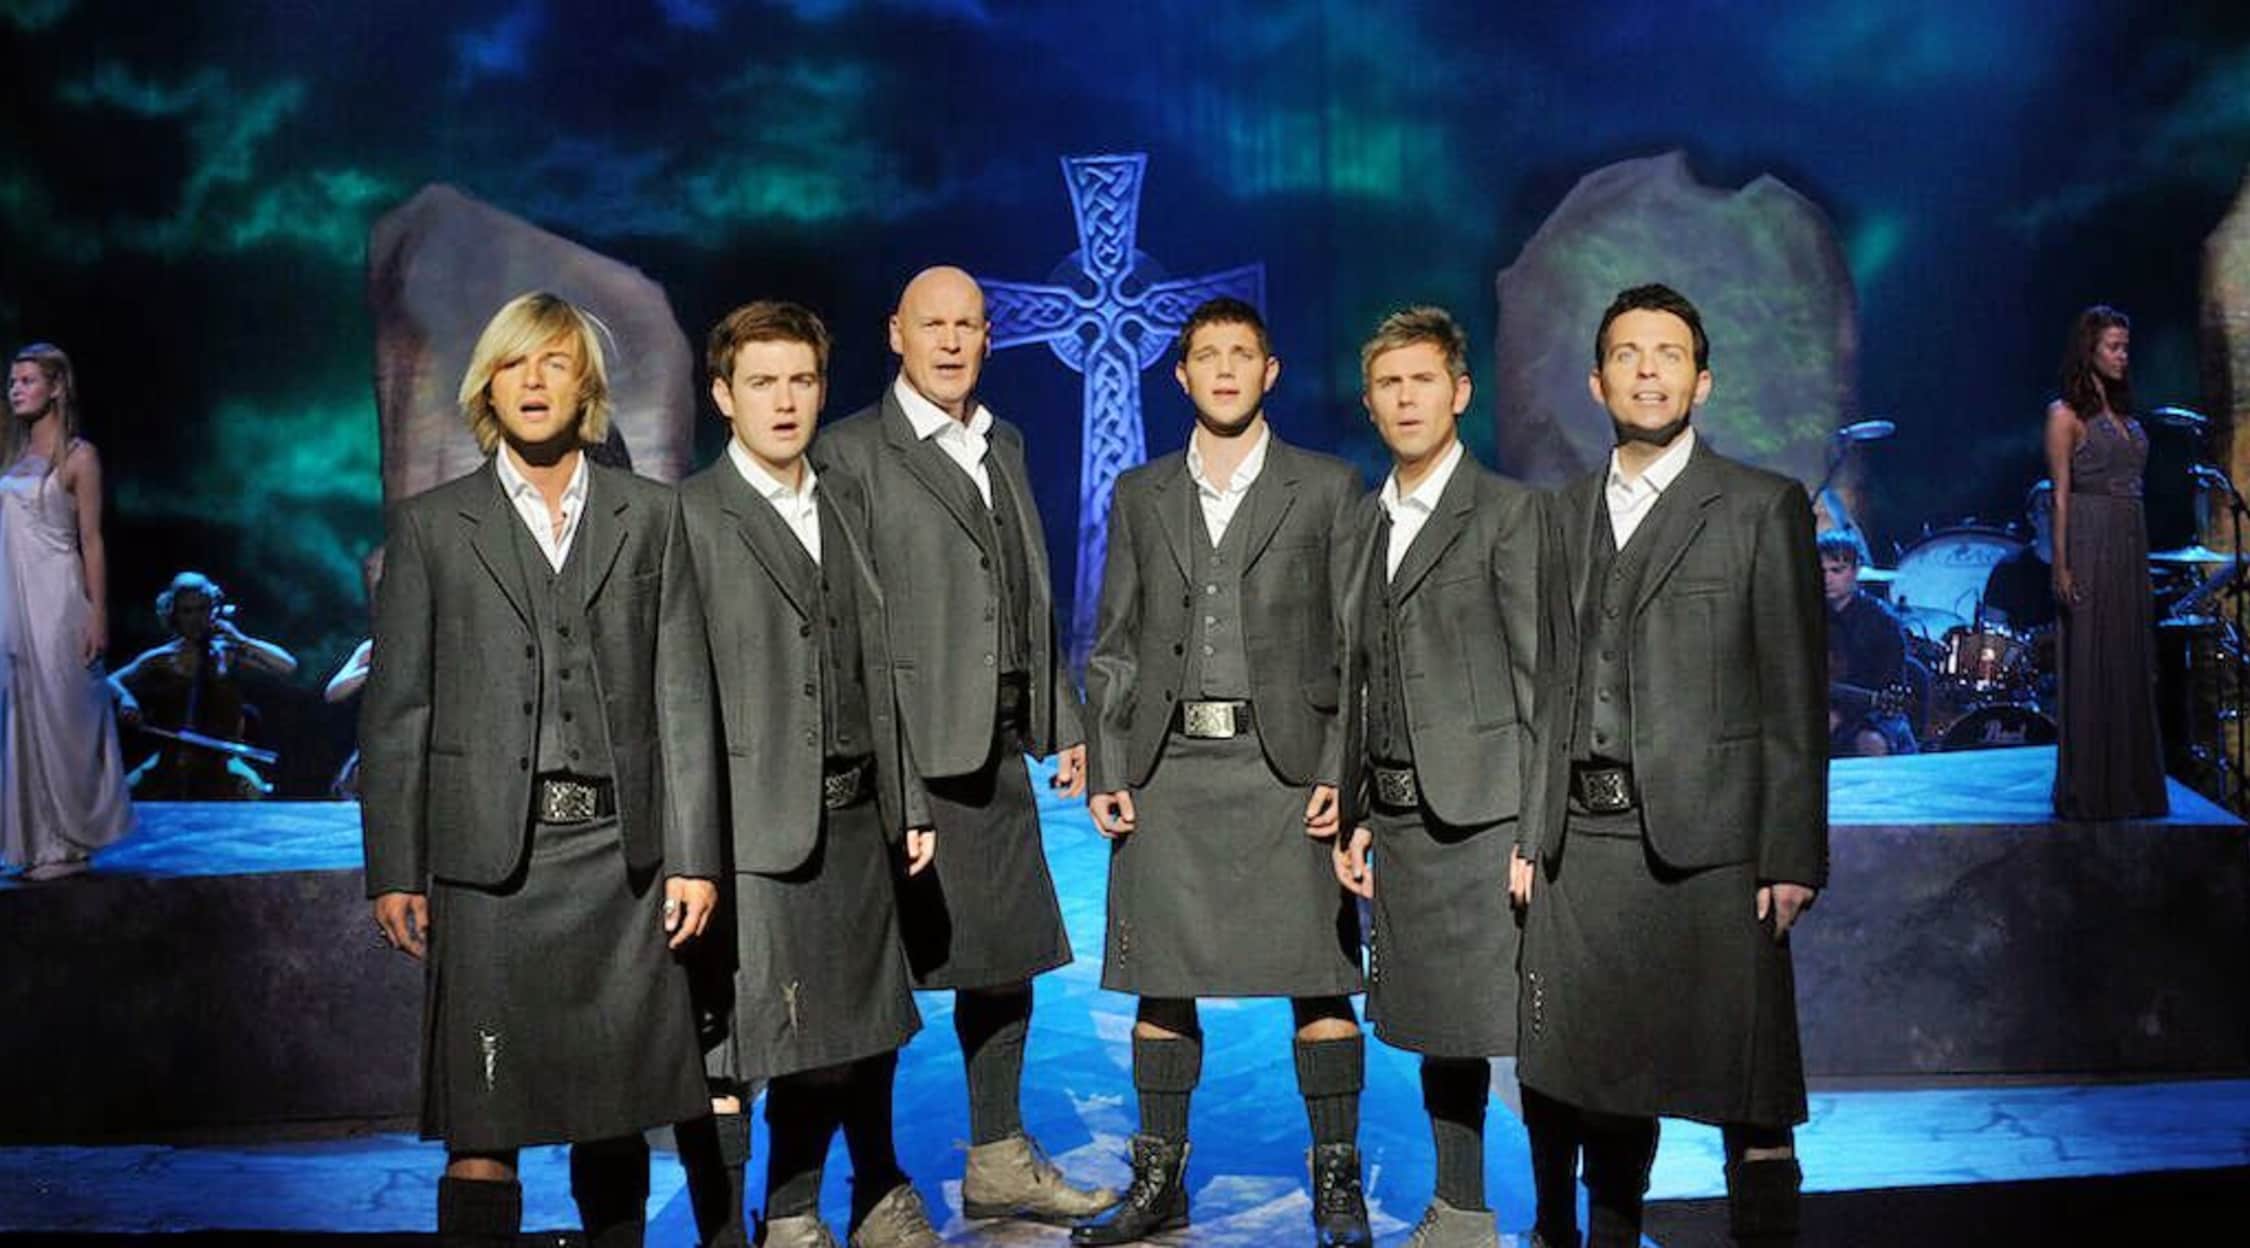 Celtic Thunder Tickets - Celtic Thunder Concert Tickets and Tour Dates